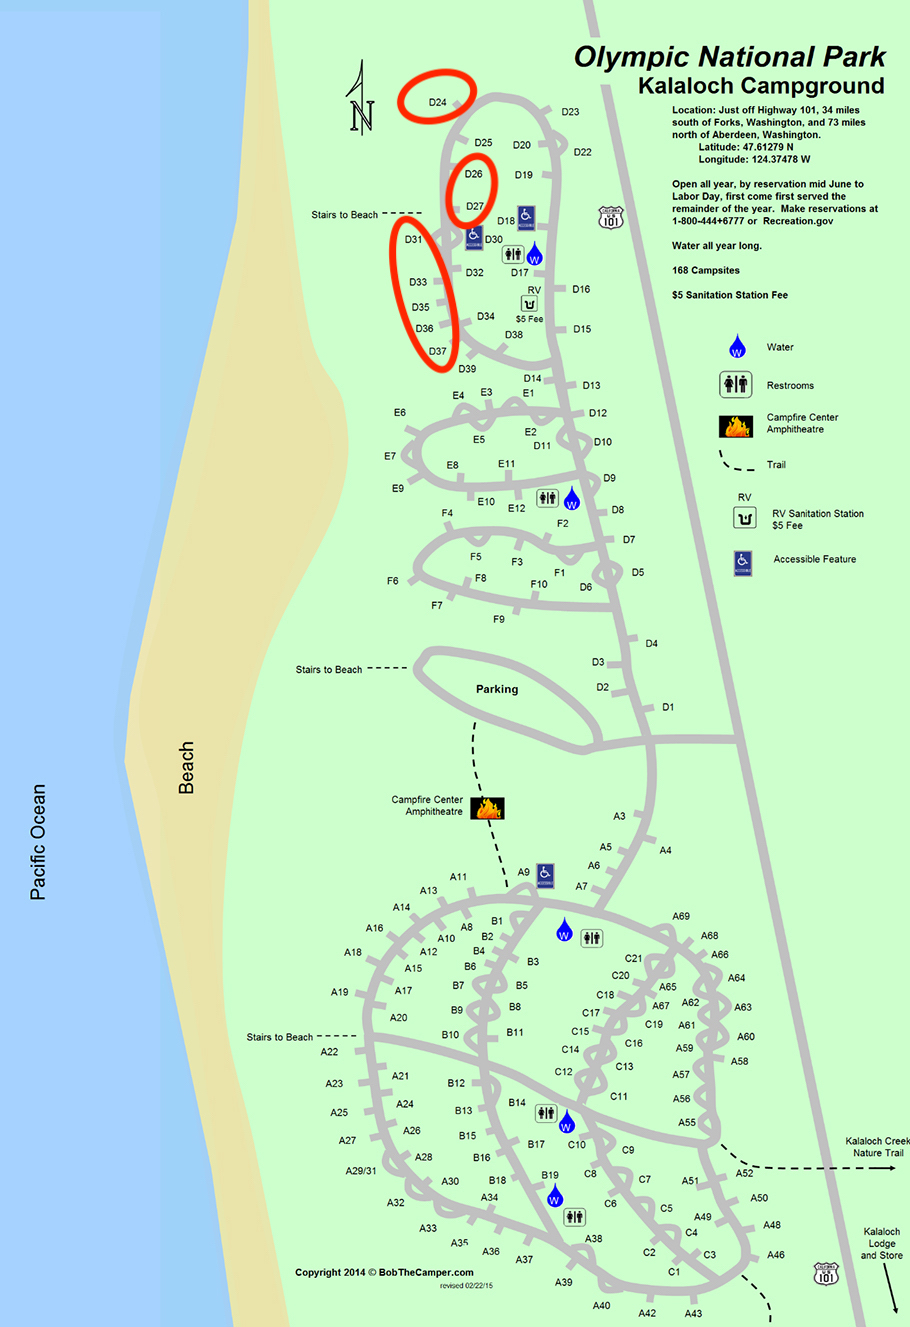 Olympic_National_Park_Kalaloch_Campground_Map_2-22-15-1311x1912.jpg